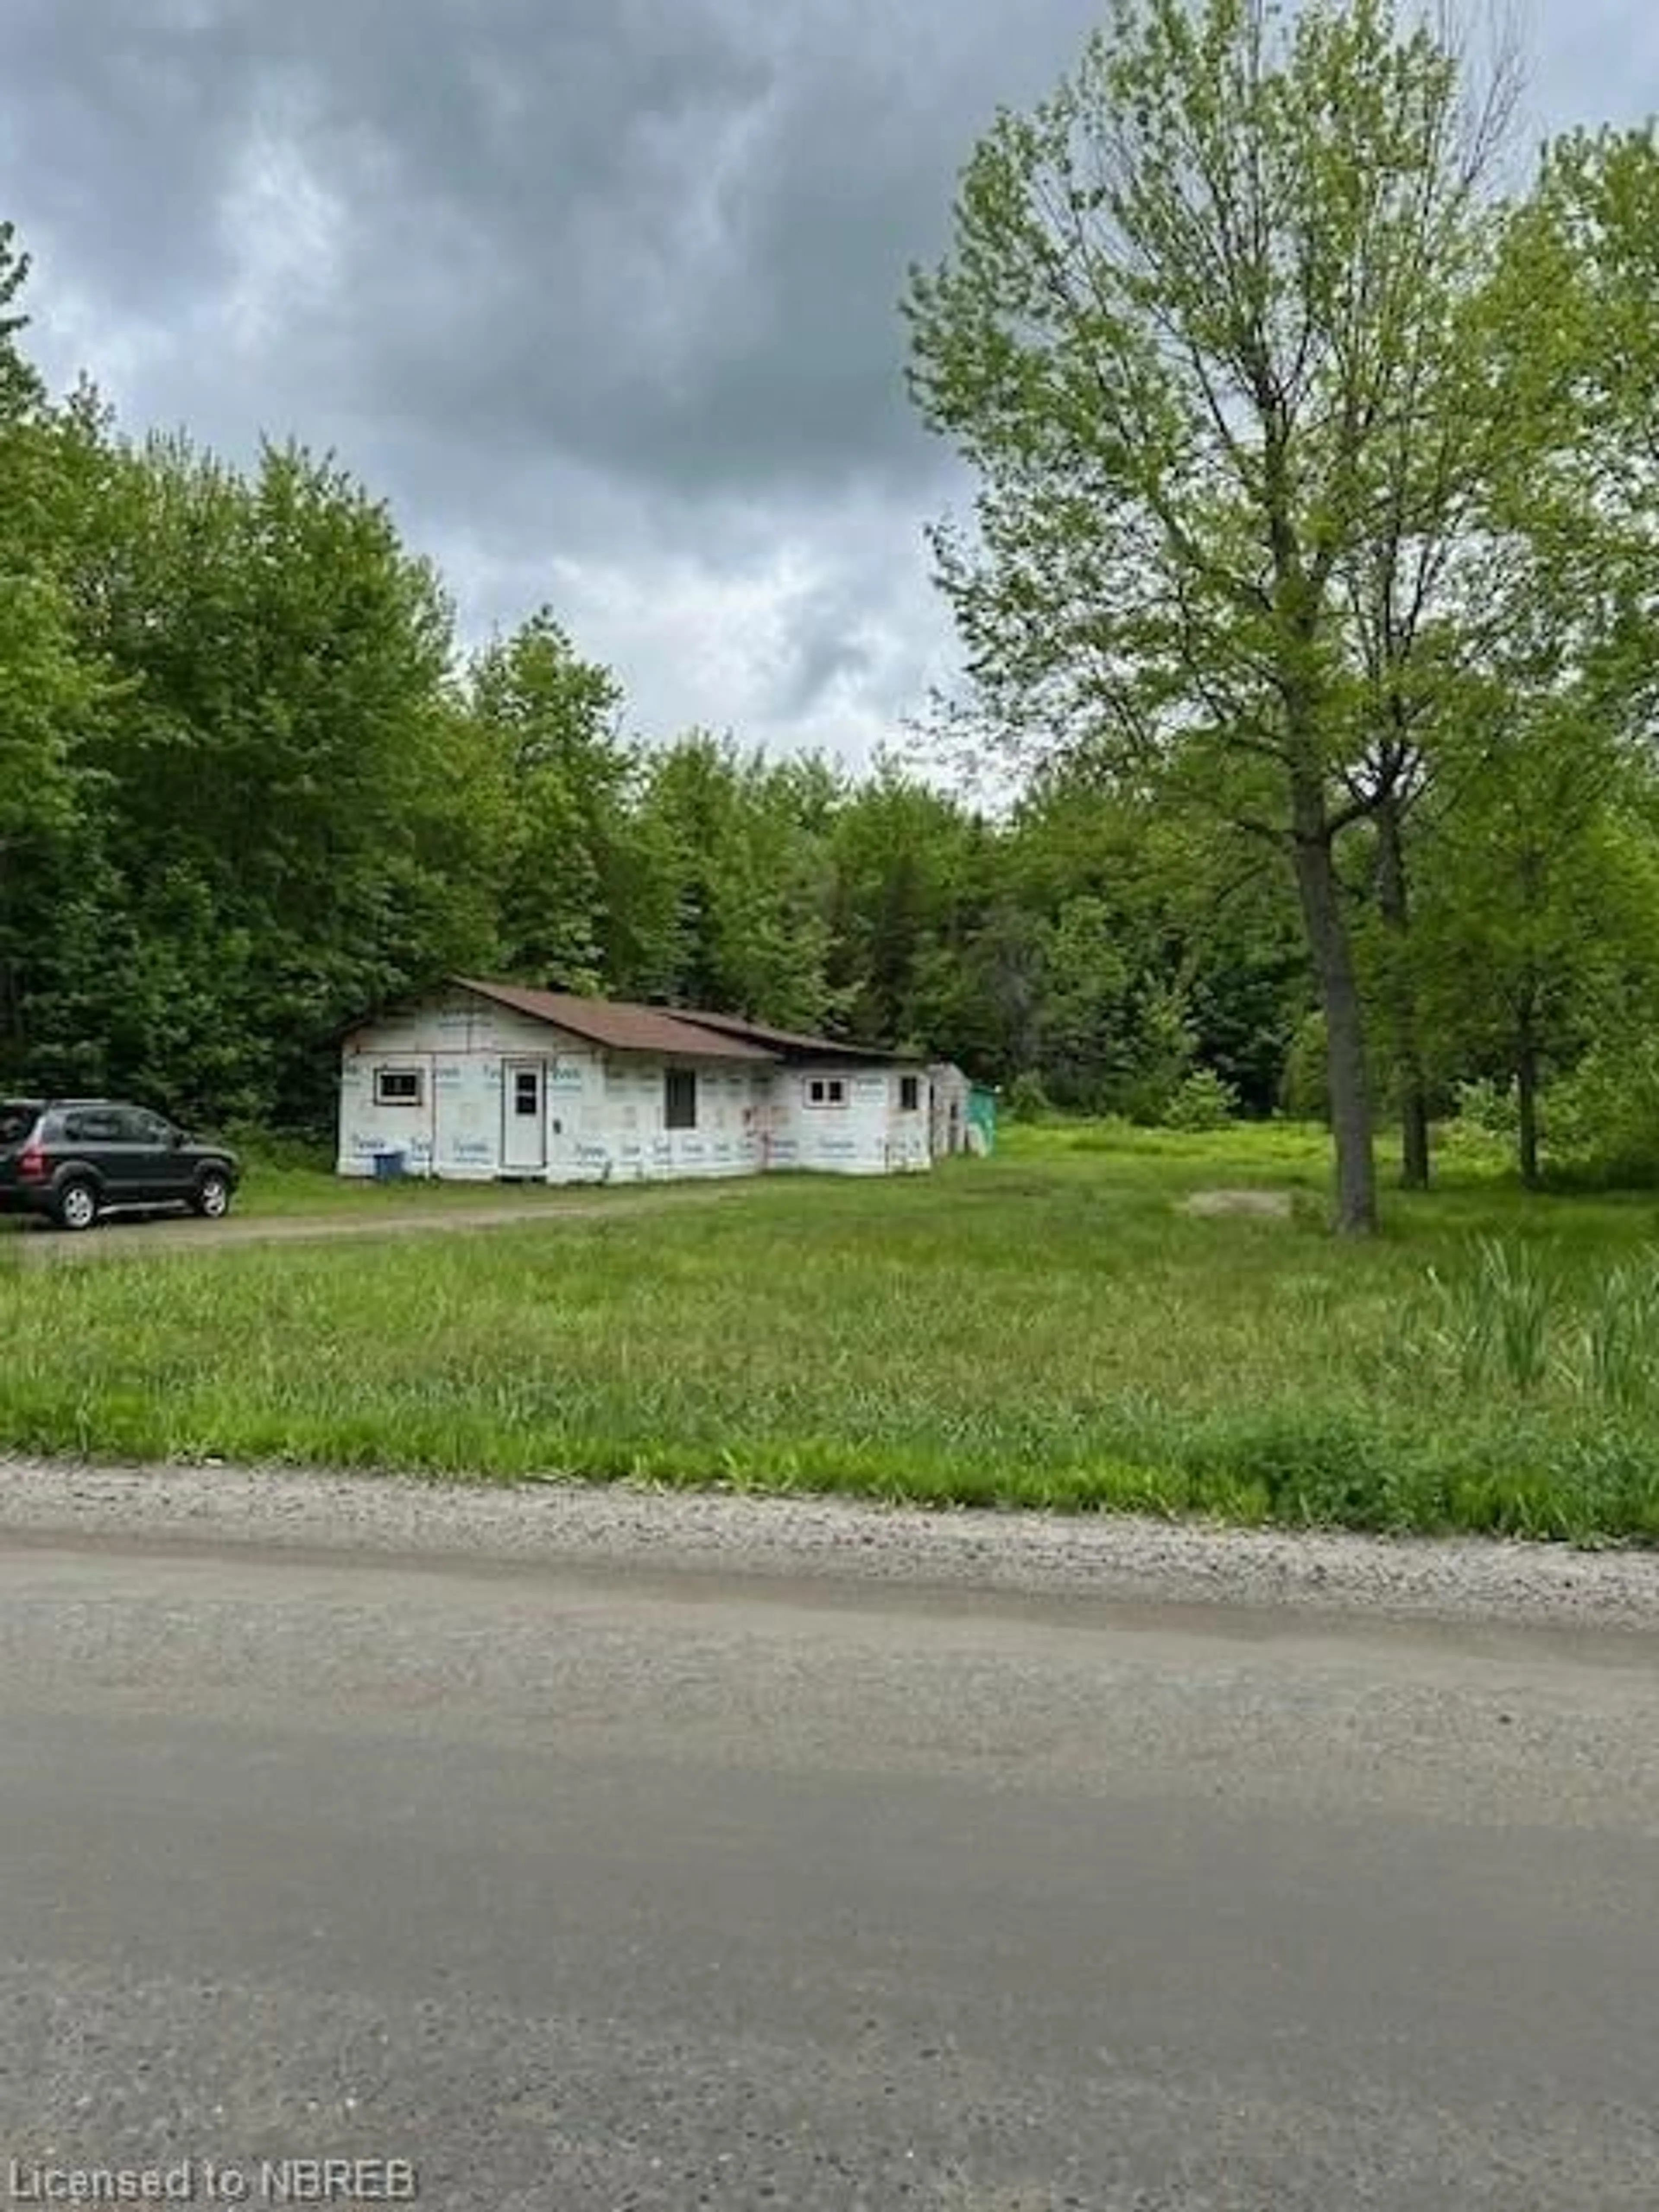 Frontside or backside of a home for 940 Jocko Point Rd, North Bay Ontario P1B 8G5